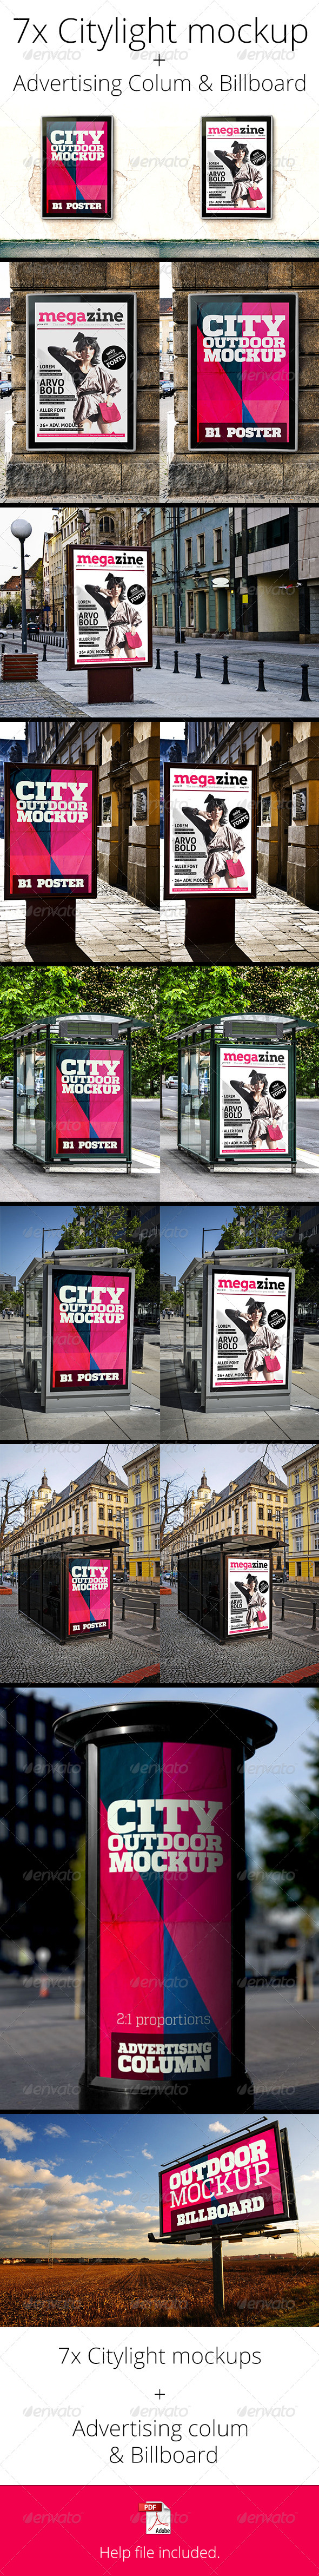 City Outdoor Mock-Up Pack by andehau | GraphicRiver